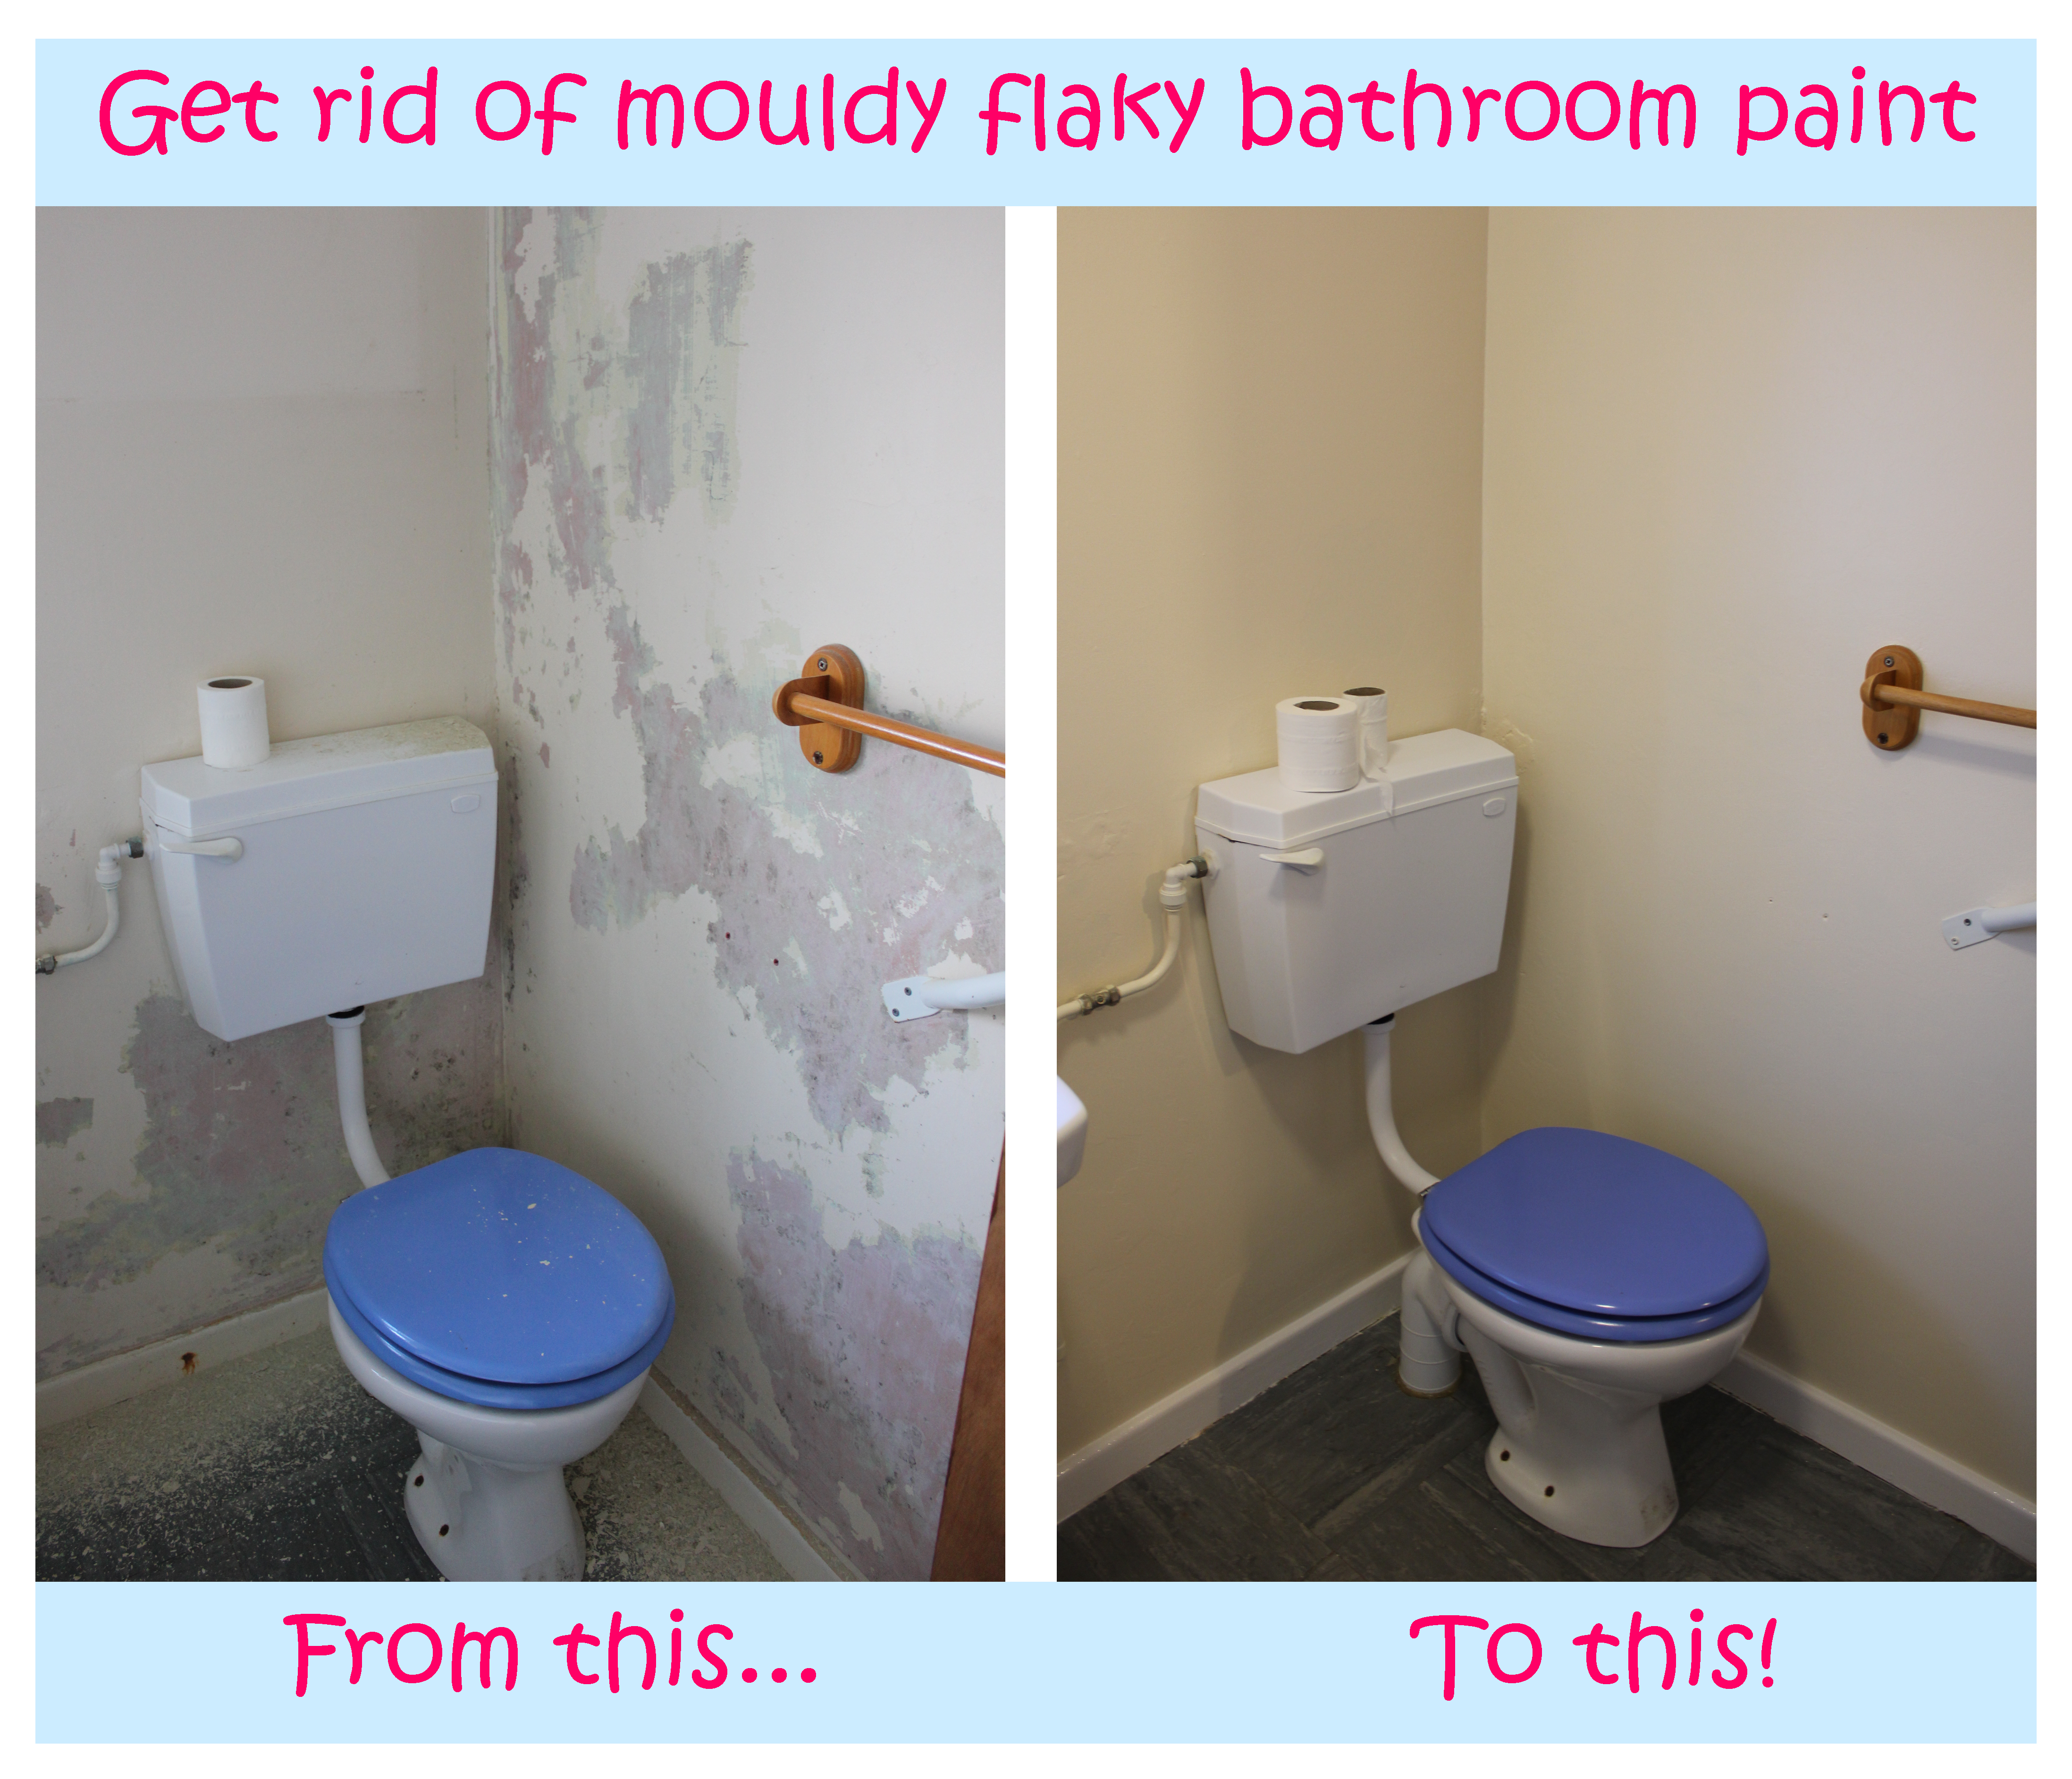 DIY life hack tutorial to get rid of mould flaky bathroom paint